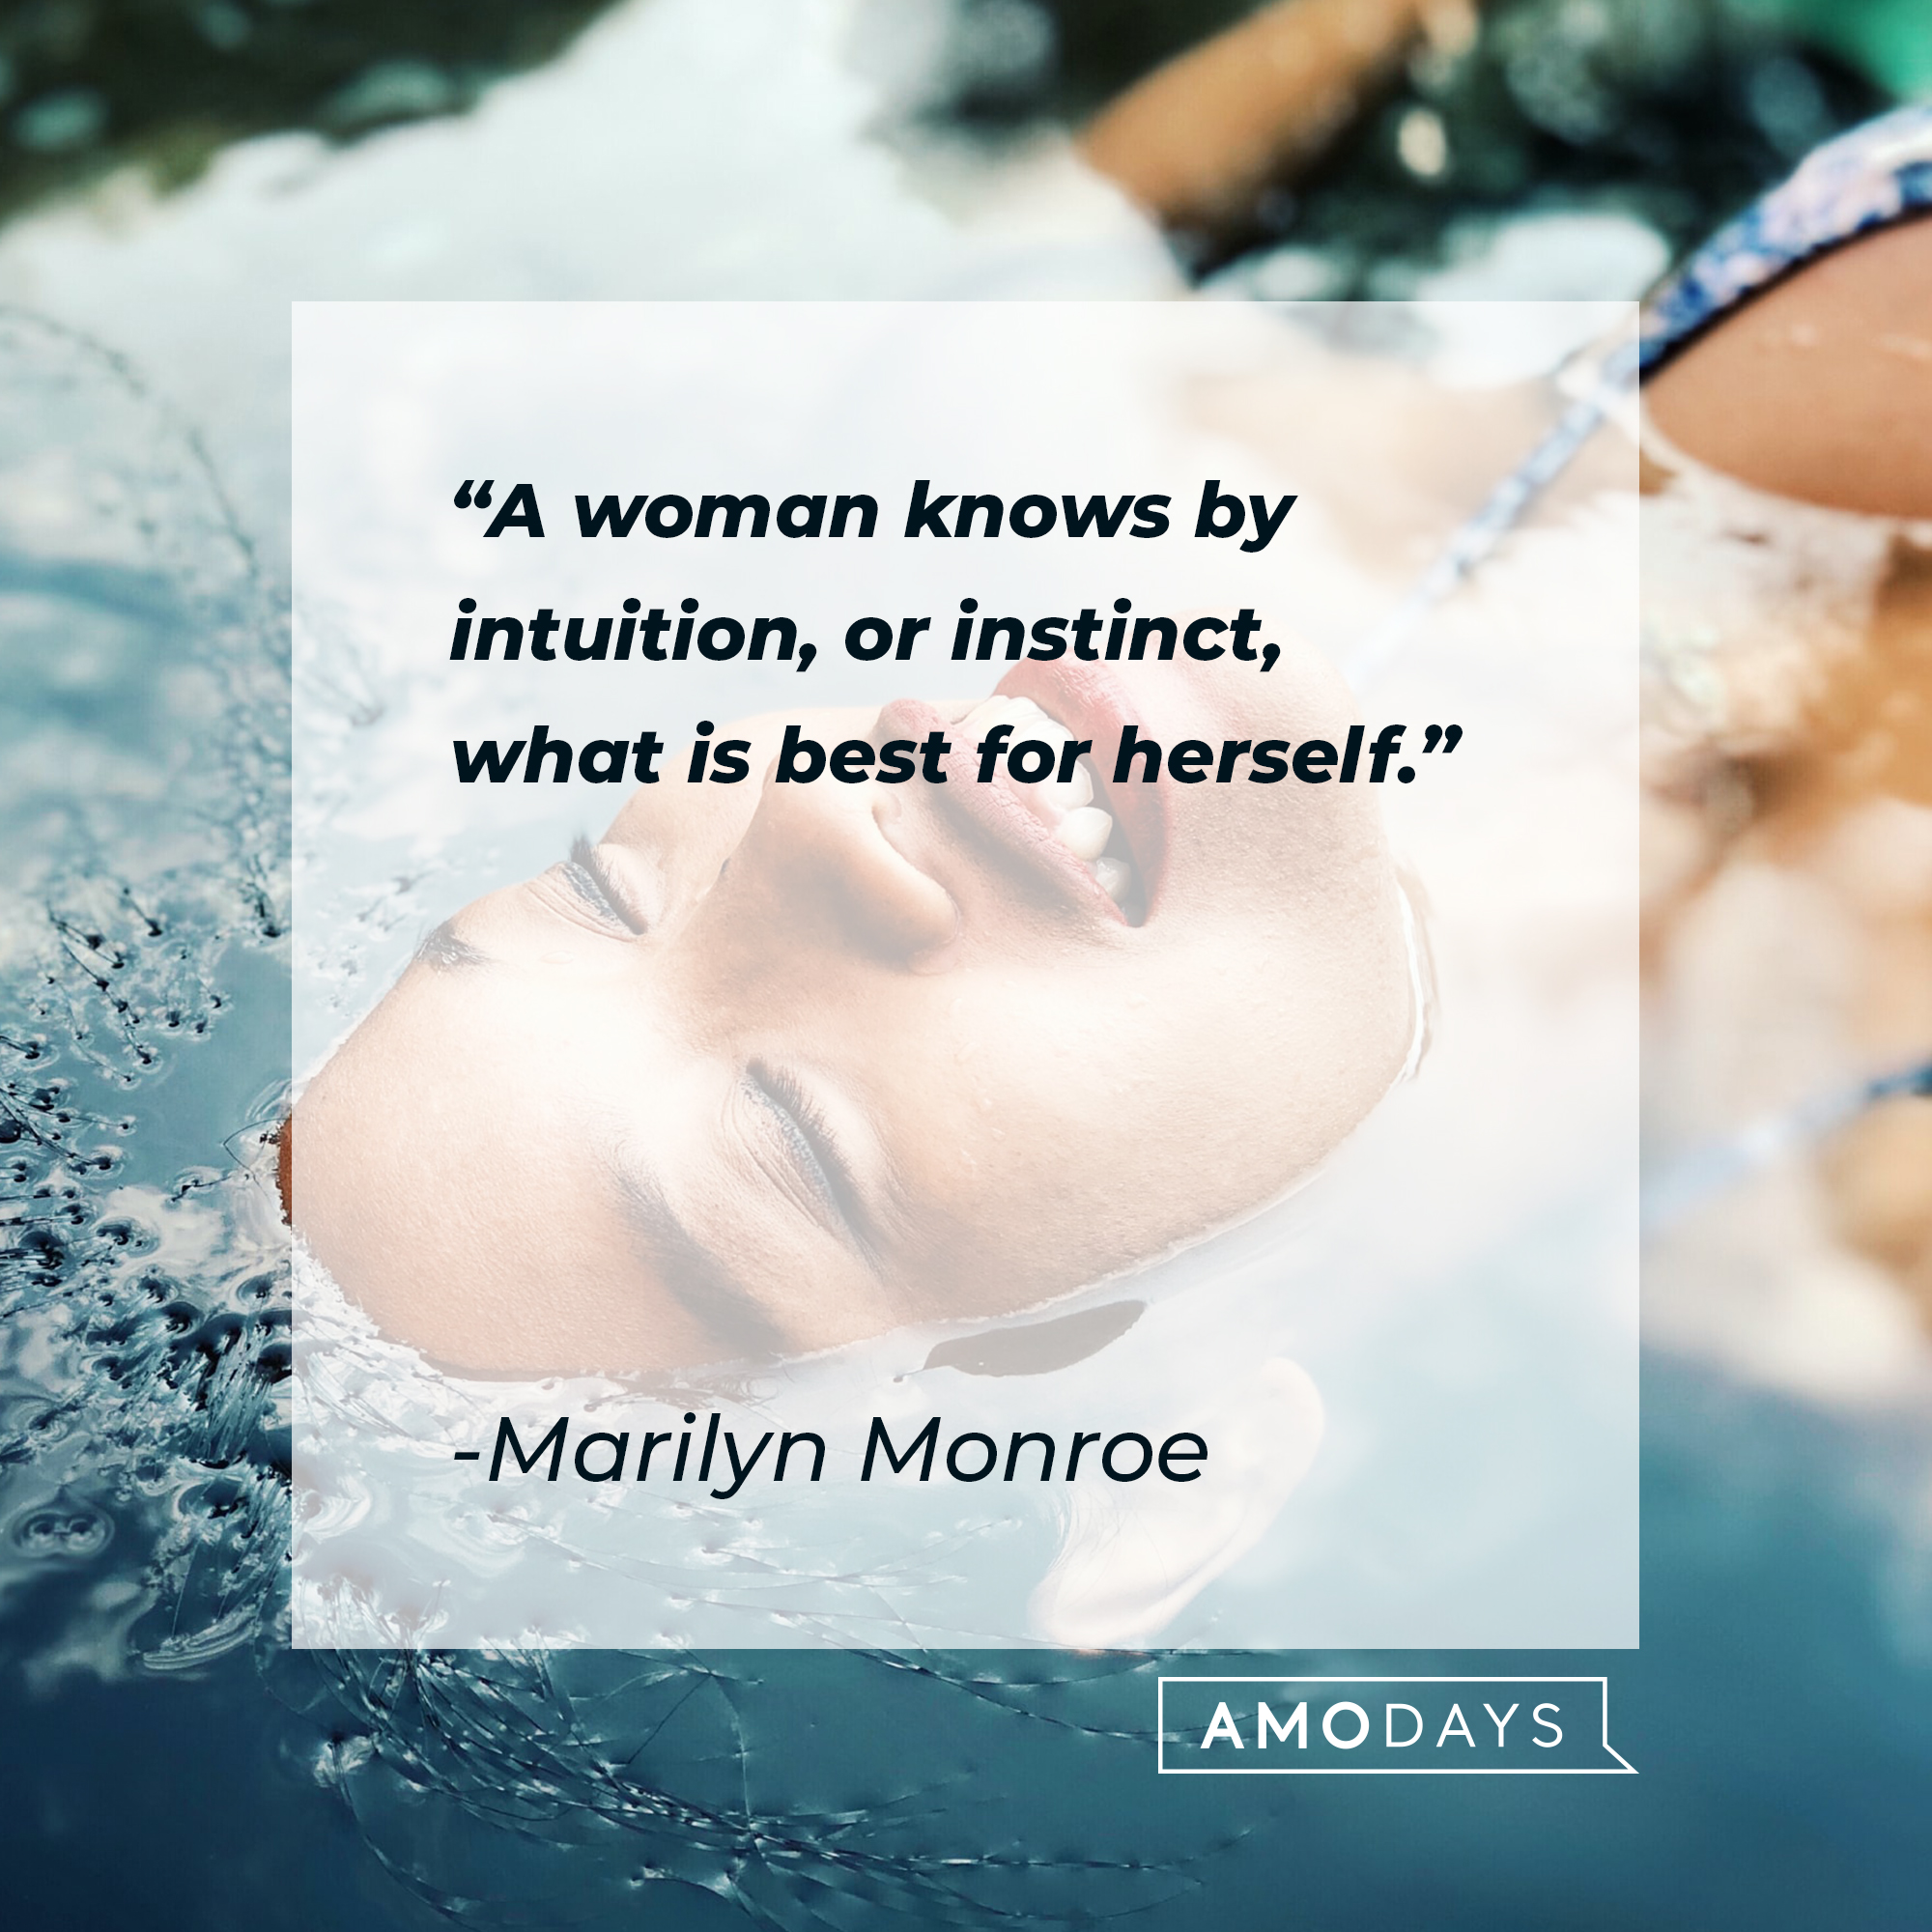 Marilyn Monroe's quote: "A woman knows by intuition, or instinct, what is best for herself." | Image: Unsplash.com